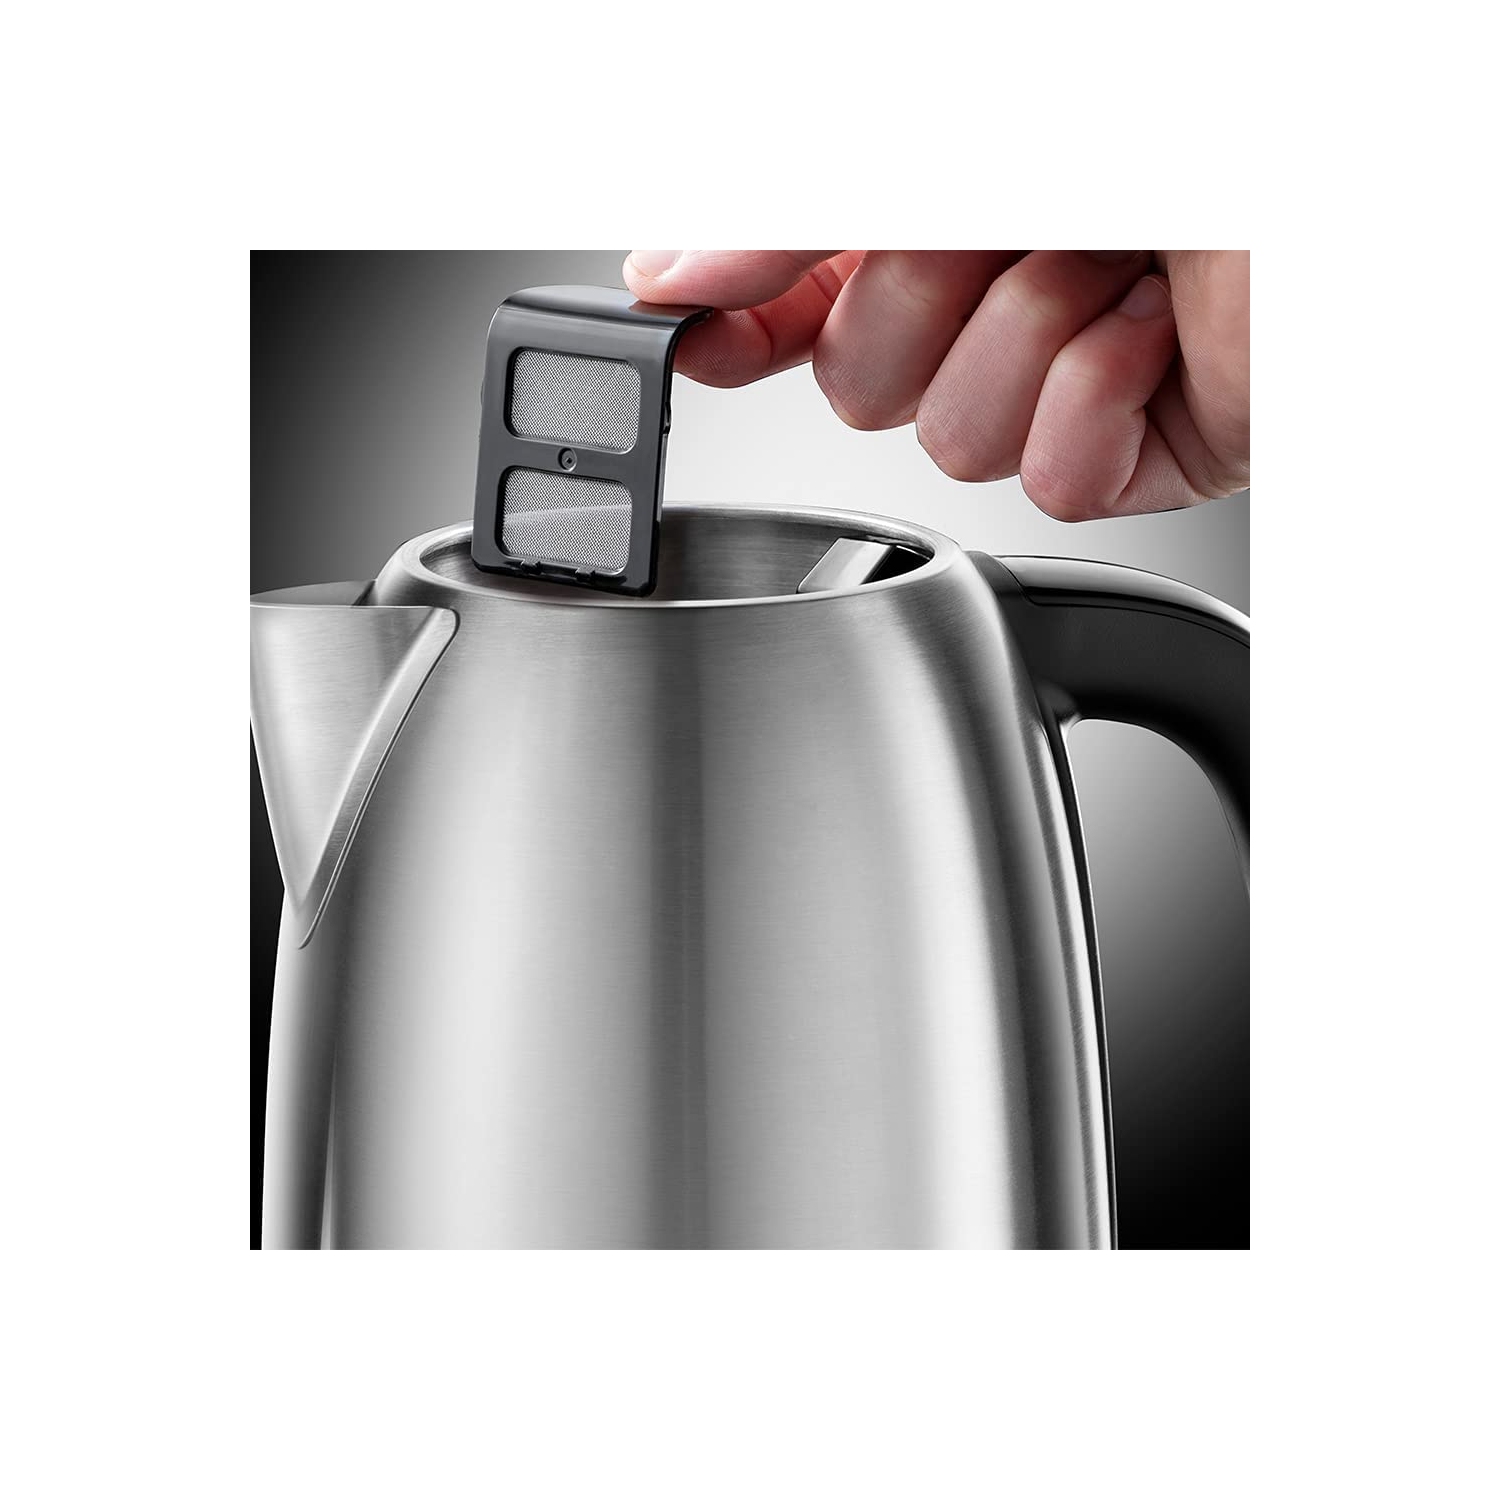 Fastest Boiling Kettle Only 45 Seconds Russell Hobbs Stainless